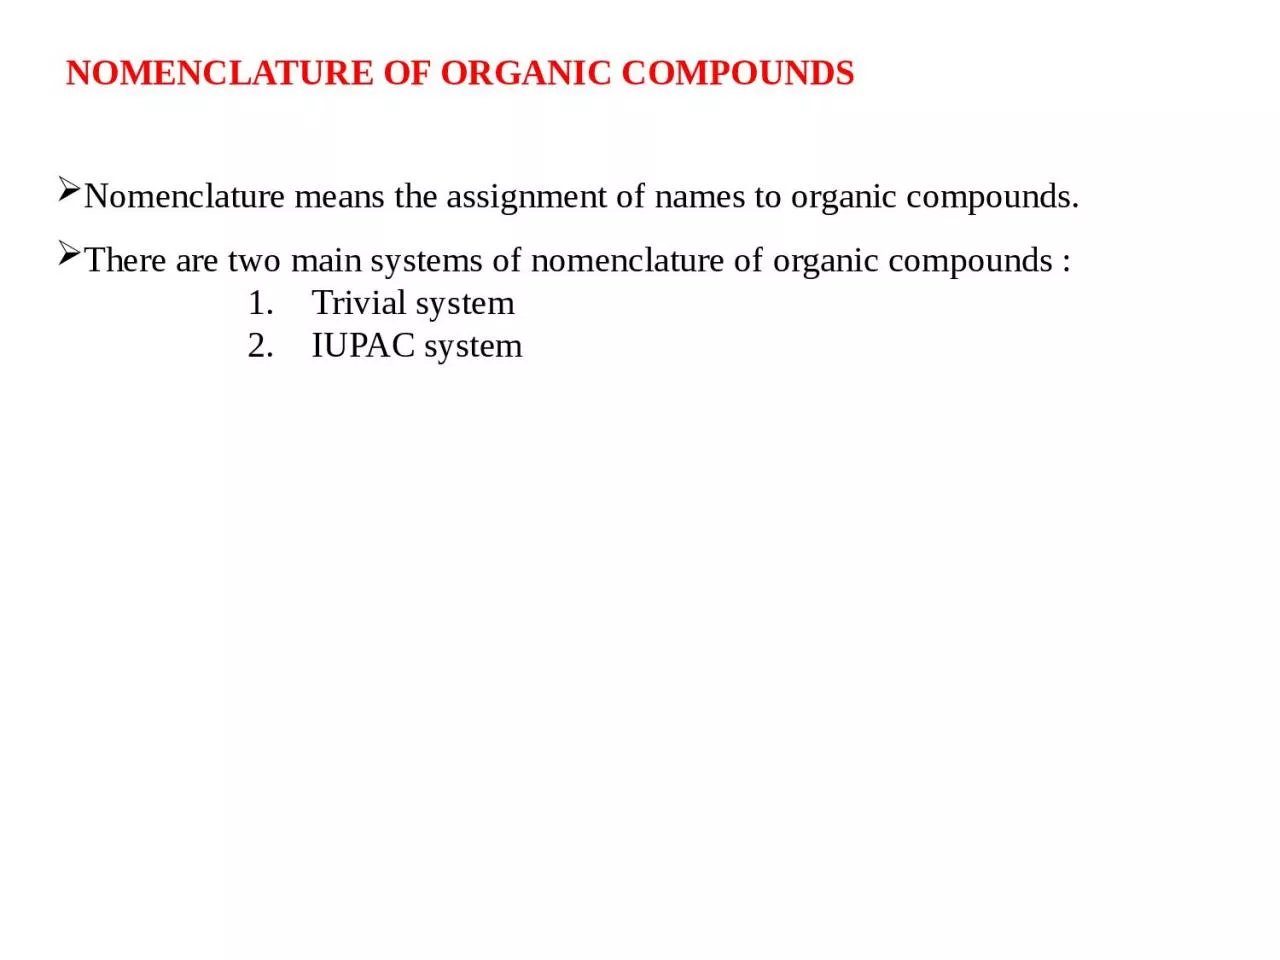 Nomenclature means the assignment of names to organic compounds.